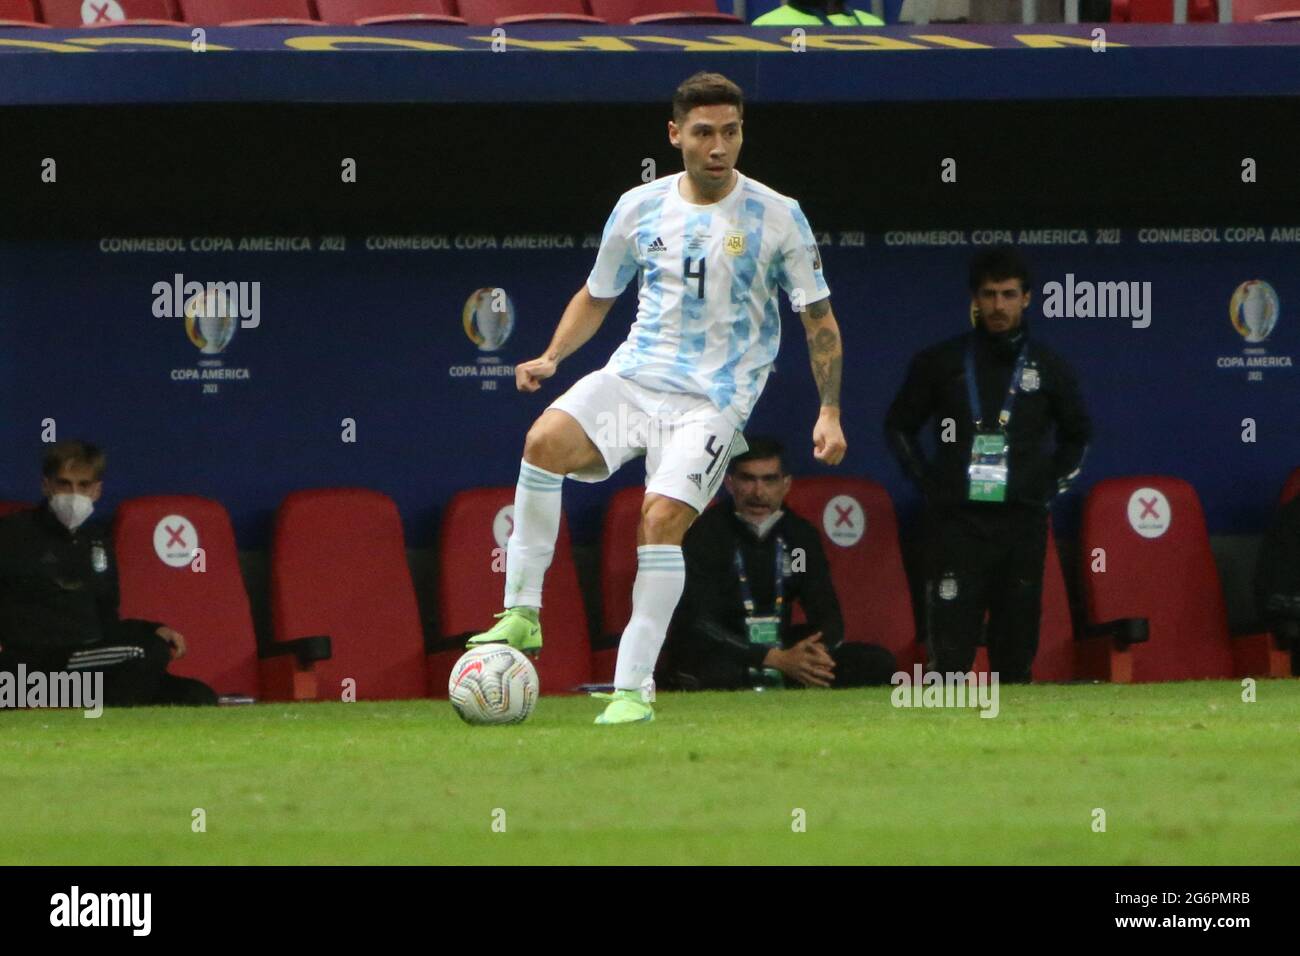 Brasilia, Brazil. 6th July, 2021.G Montiel of Argentina during the Copa America 2021, semi-final football match between Argentina and Colombia on July 6, 2021 at Estádio Nacional Mané Garrincha in Brasilia, Brazil. Photo by Laurent Lairys/ABACAPRESS.COM Stock Photo